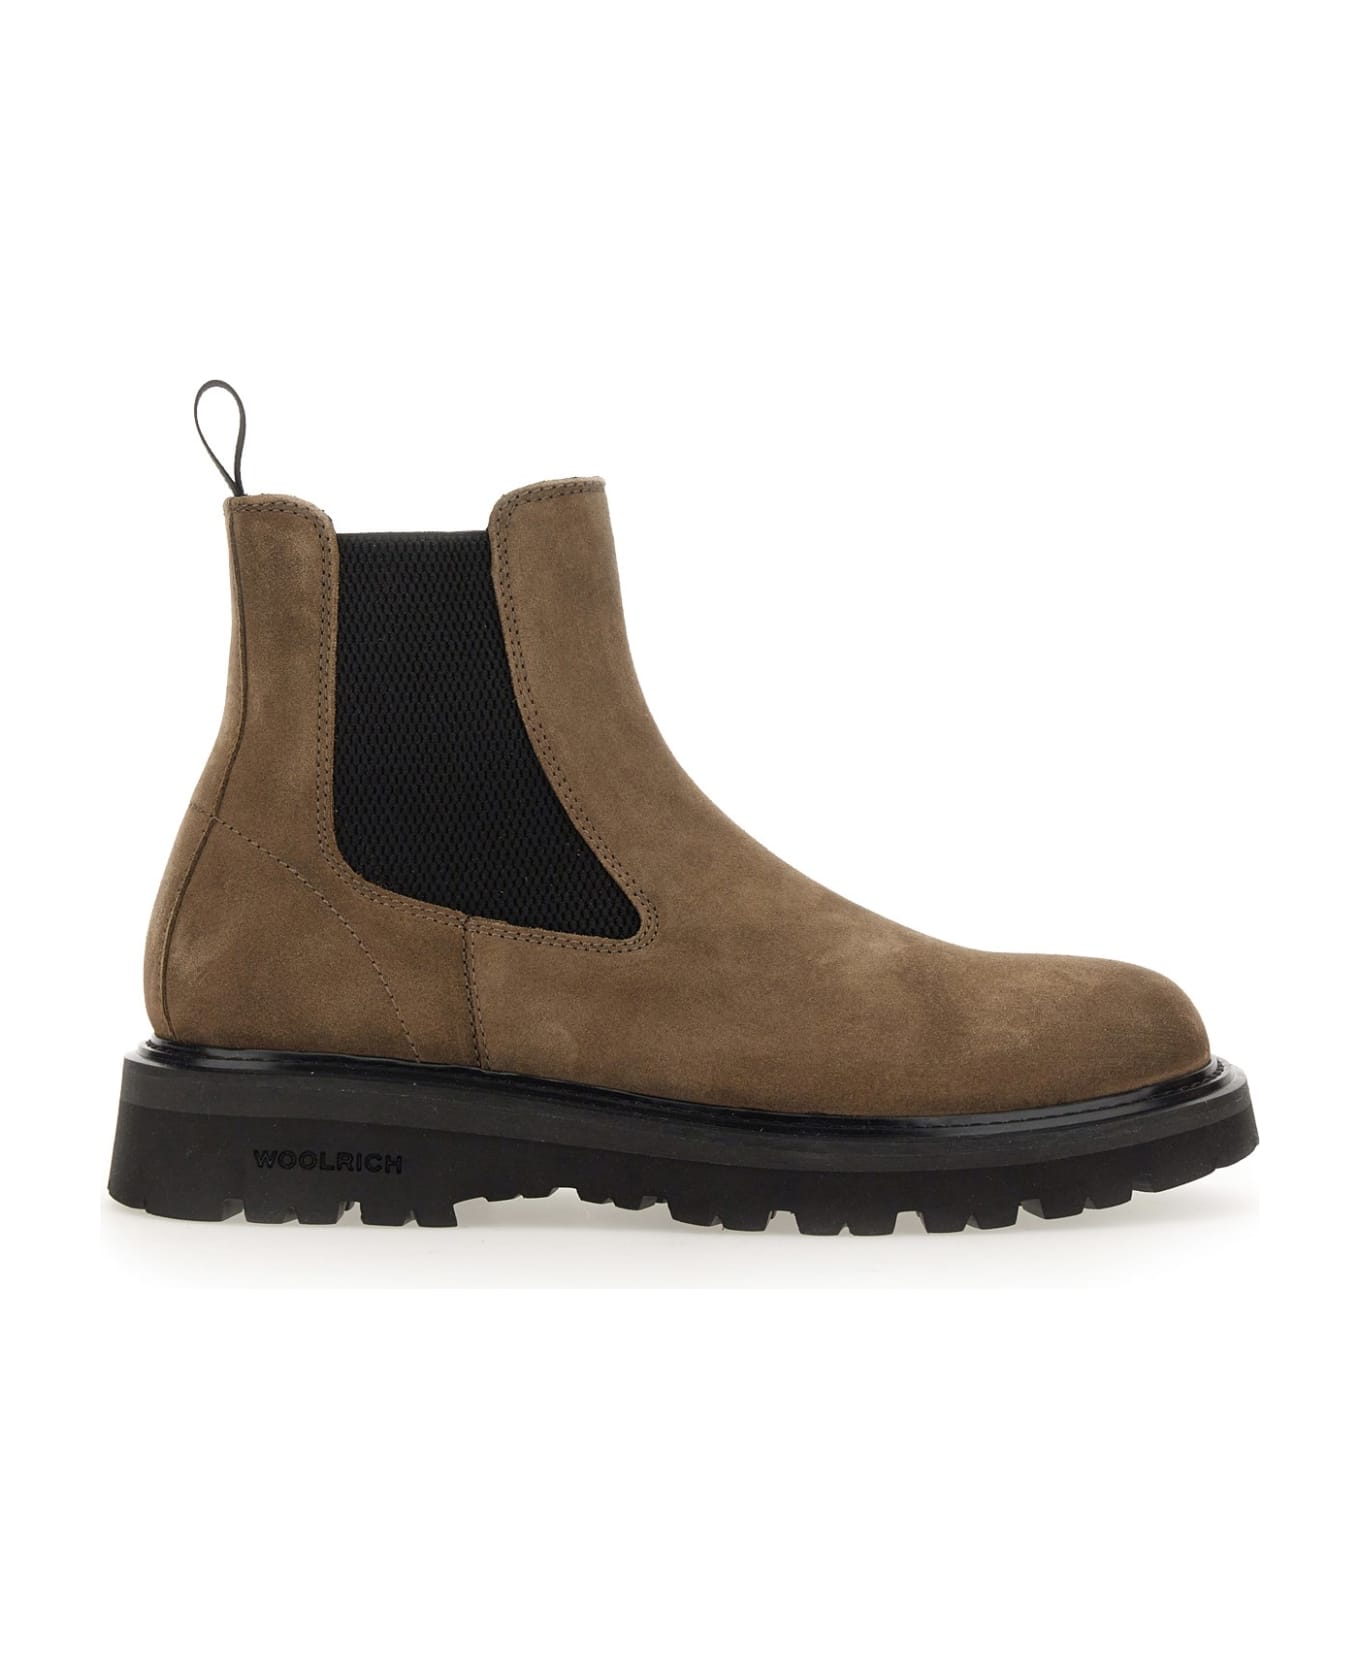 Woolrich Chelsea Boot 'new City' - Grey